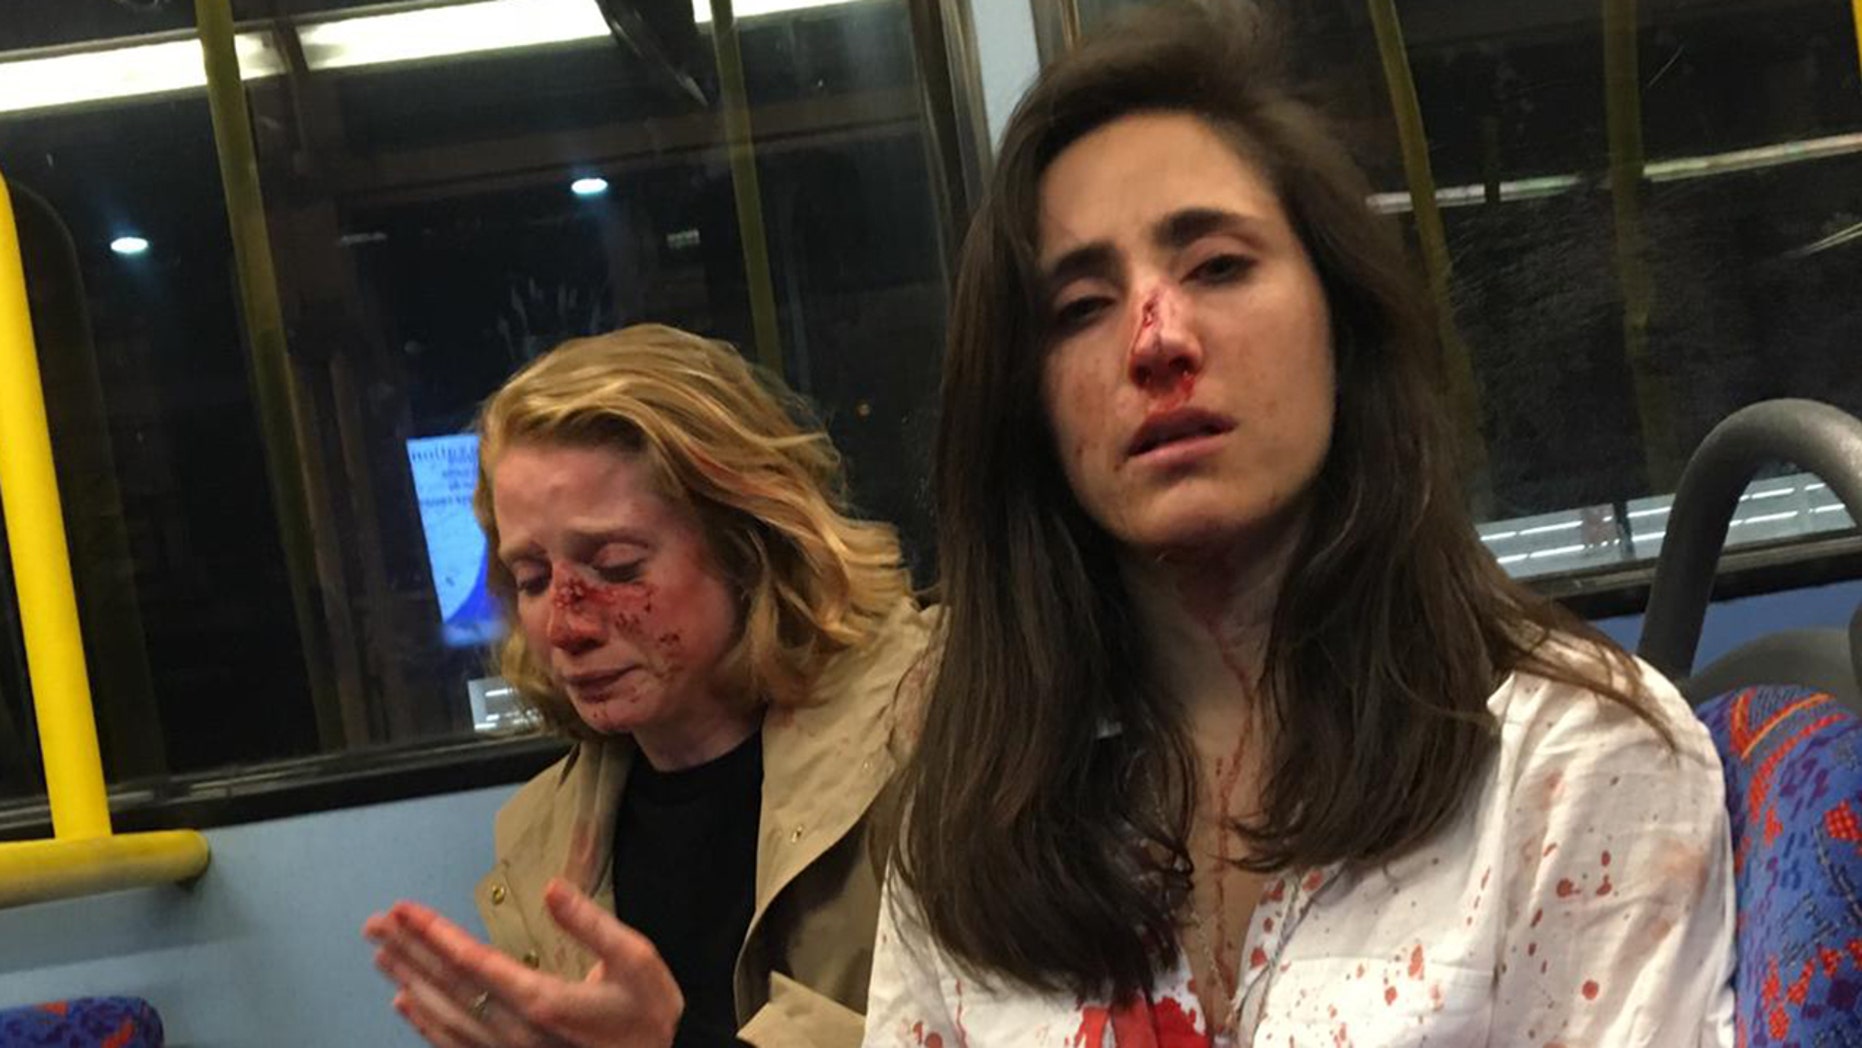 Melania Geymonat, 28, (right) originally from Uruguay, was riding the bus with her girlfriend Chris (left) after an evening out in West Hampstead, London, in the early hours of Thursday, May 30.